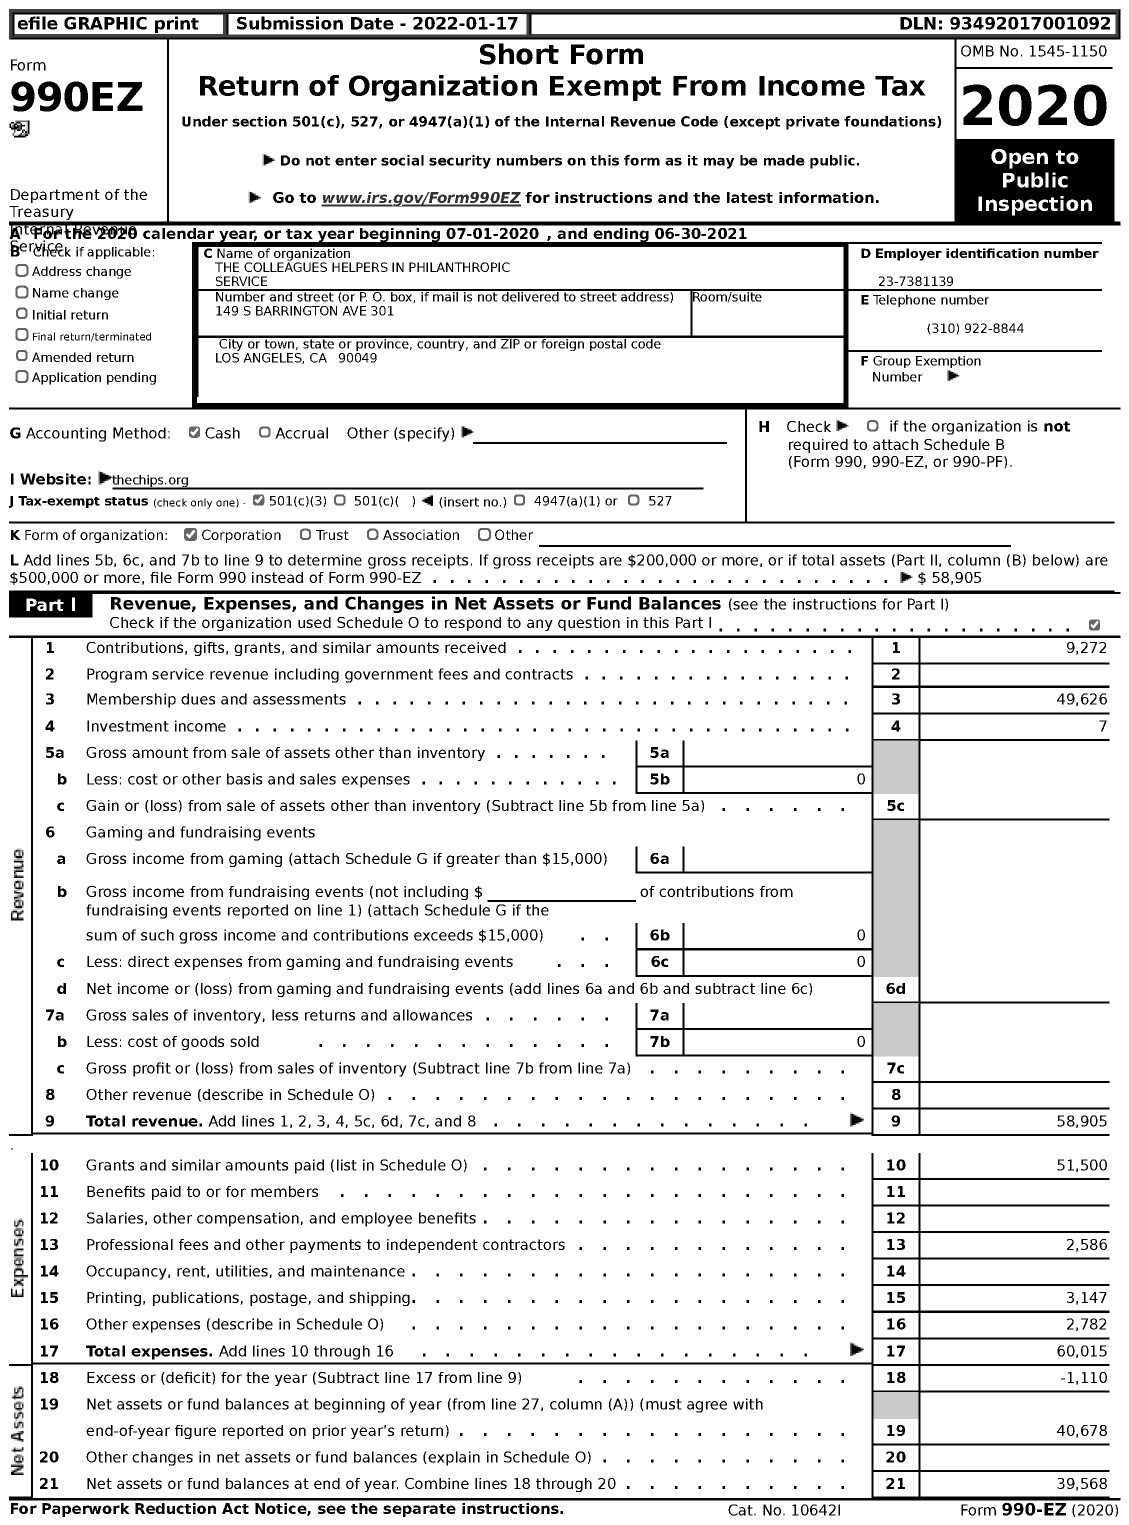 Image of first page of 2020 Form 990EZ for The Colleagues Helpers in Philanthropic Service